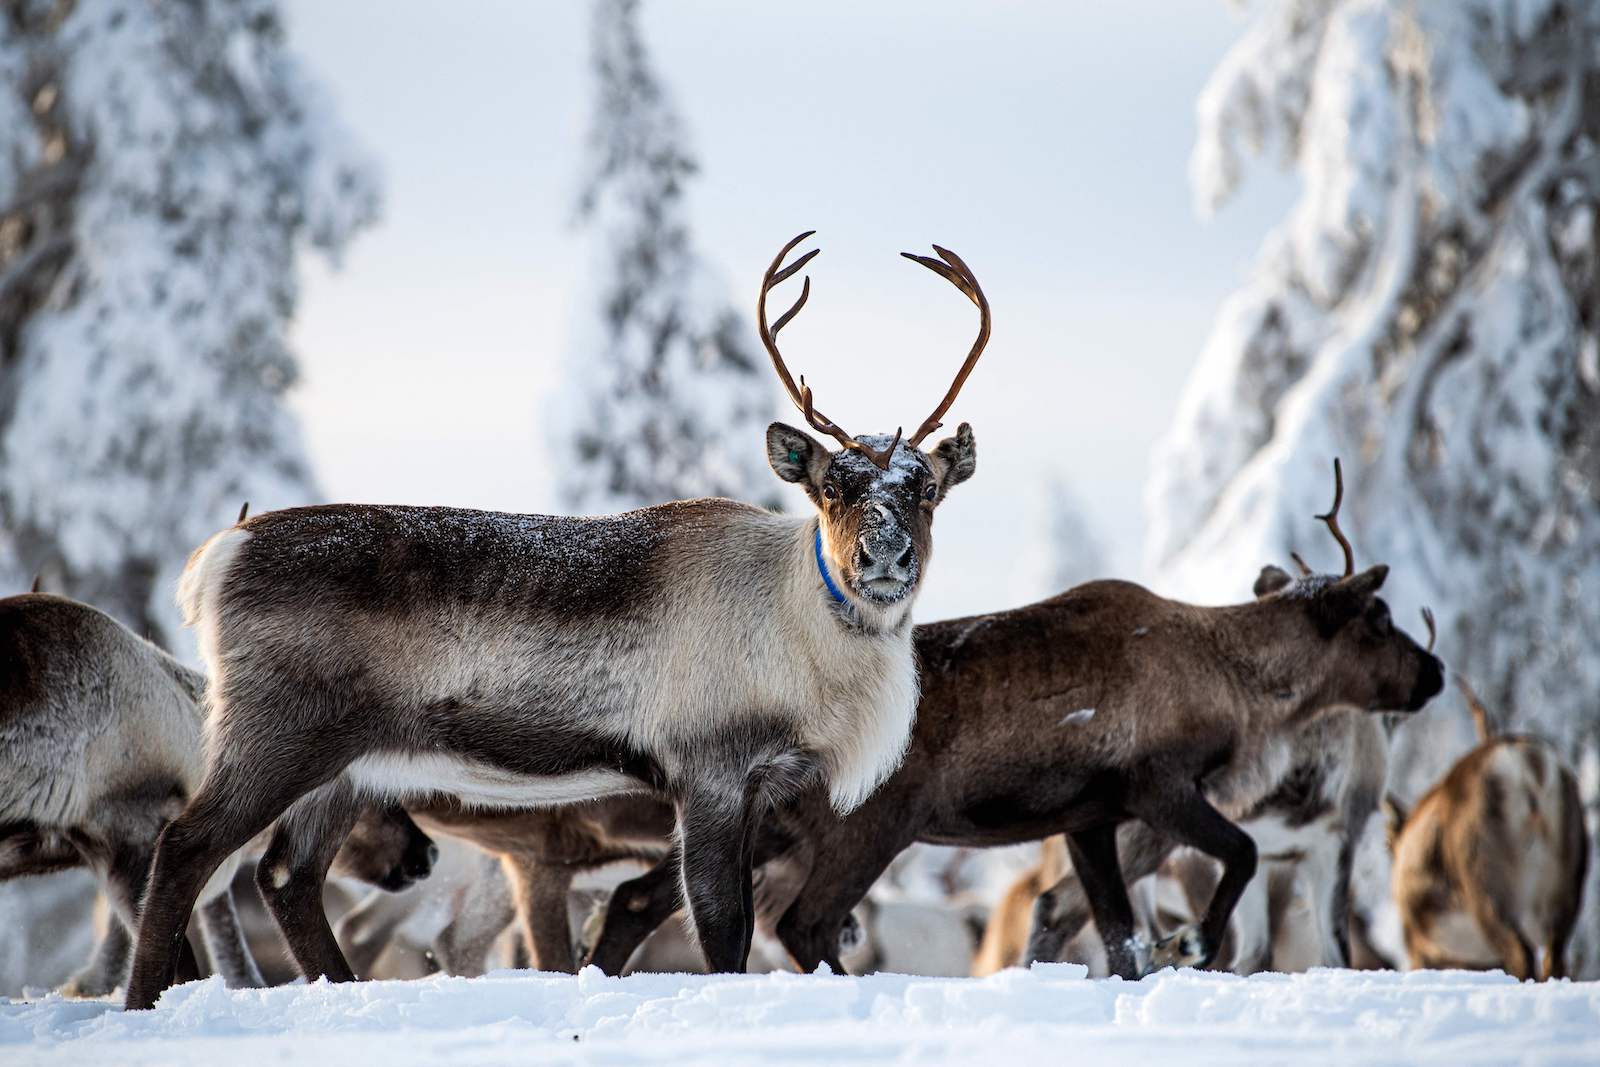 a snow-dusted reindeer looks toward the camera, with other reindeer walking in the snowy background